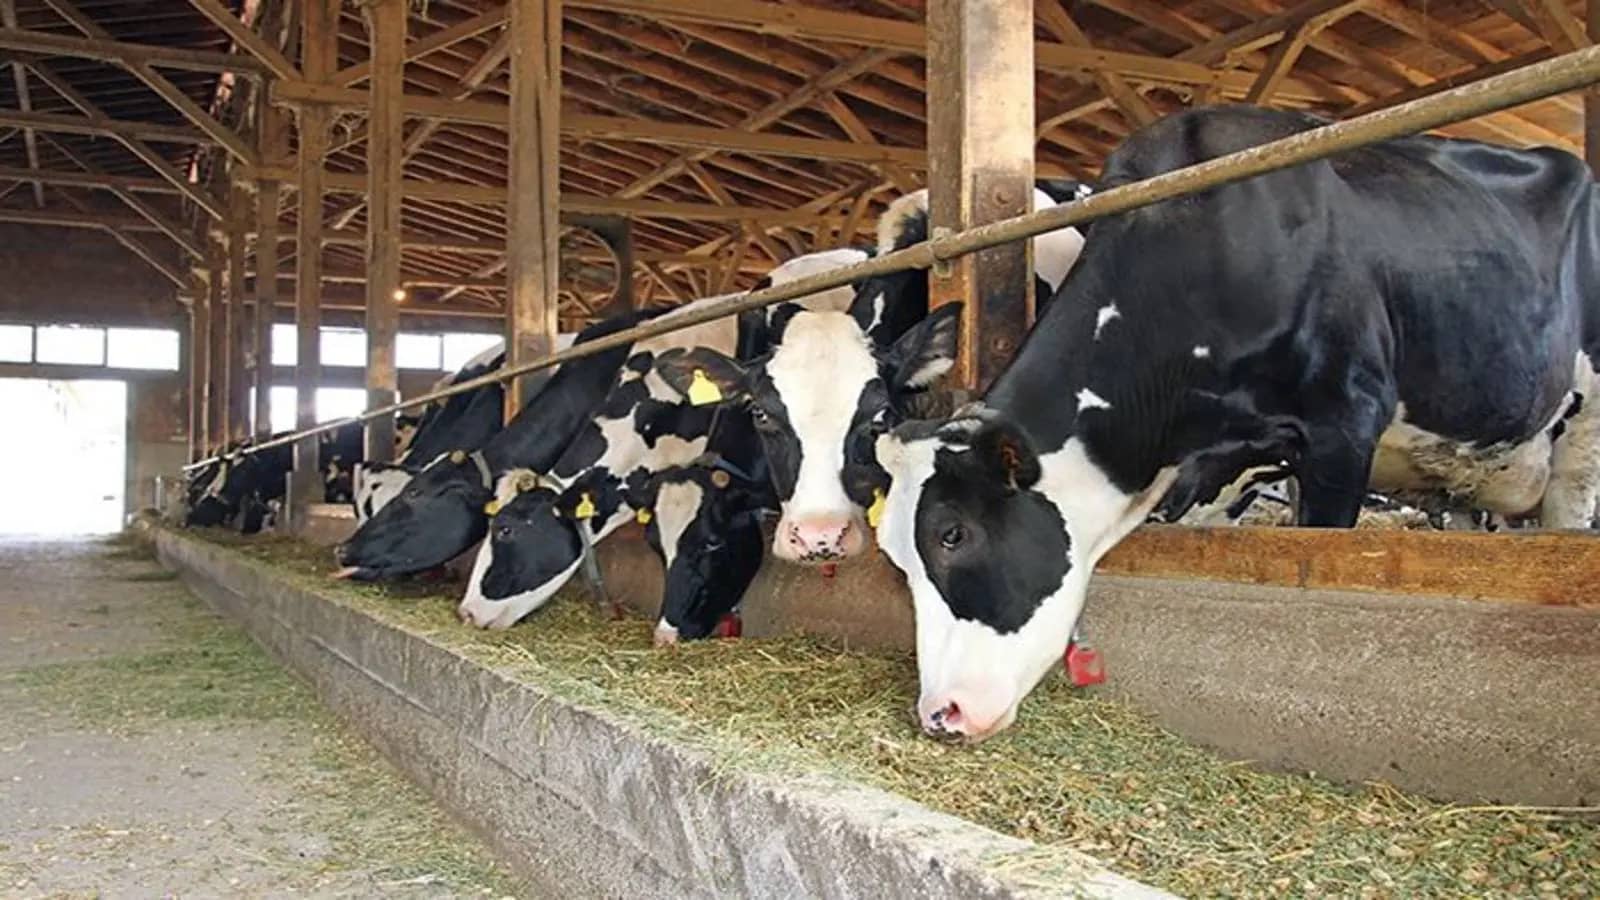 DSM’s methane-reducing feed additive safe for use in cow feed following successful pilot test in Finland